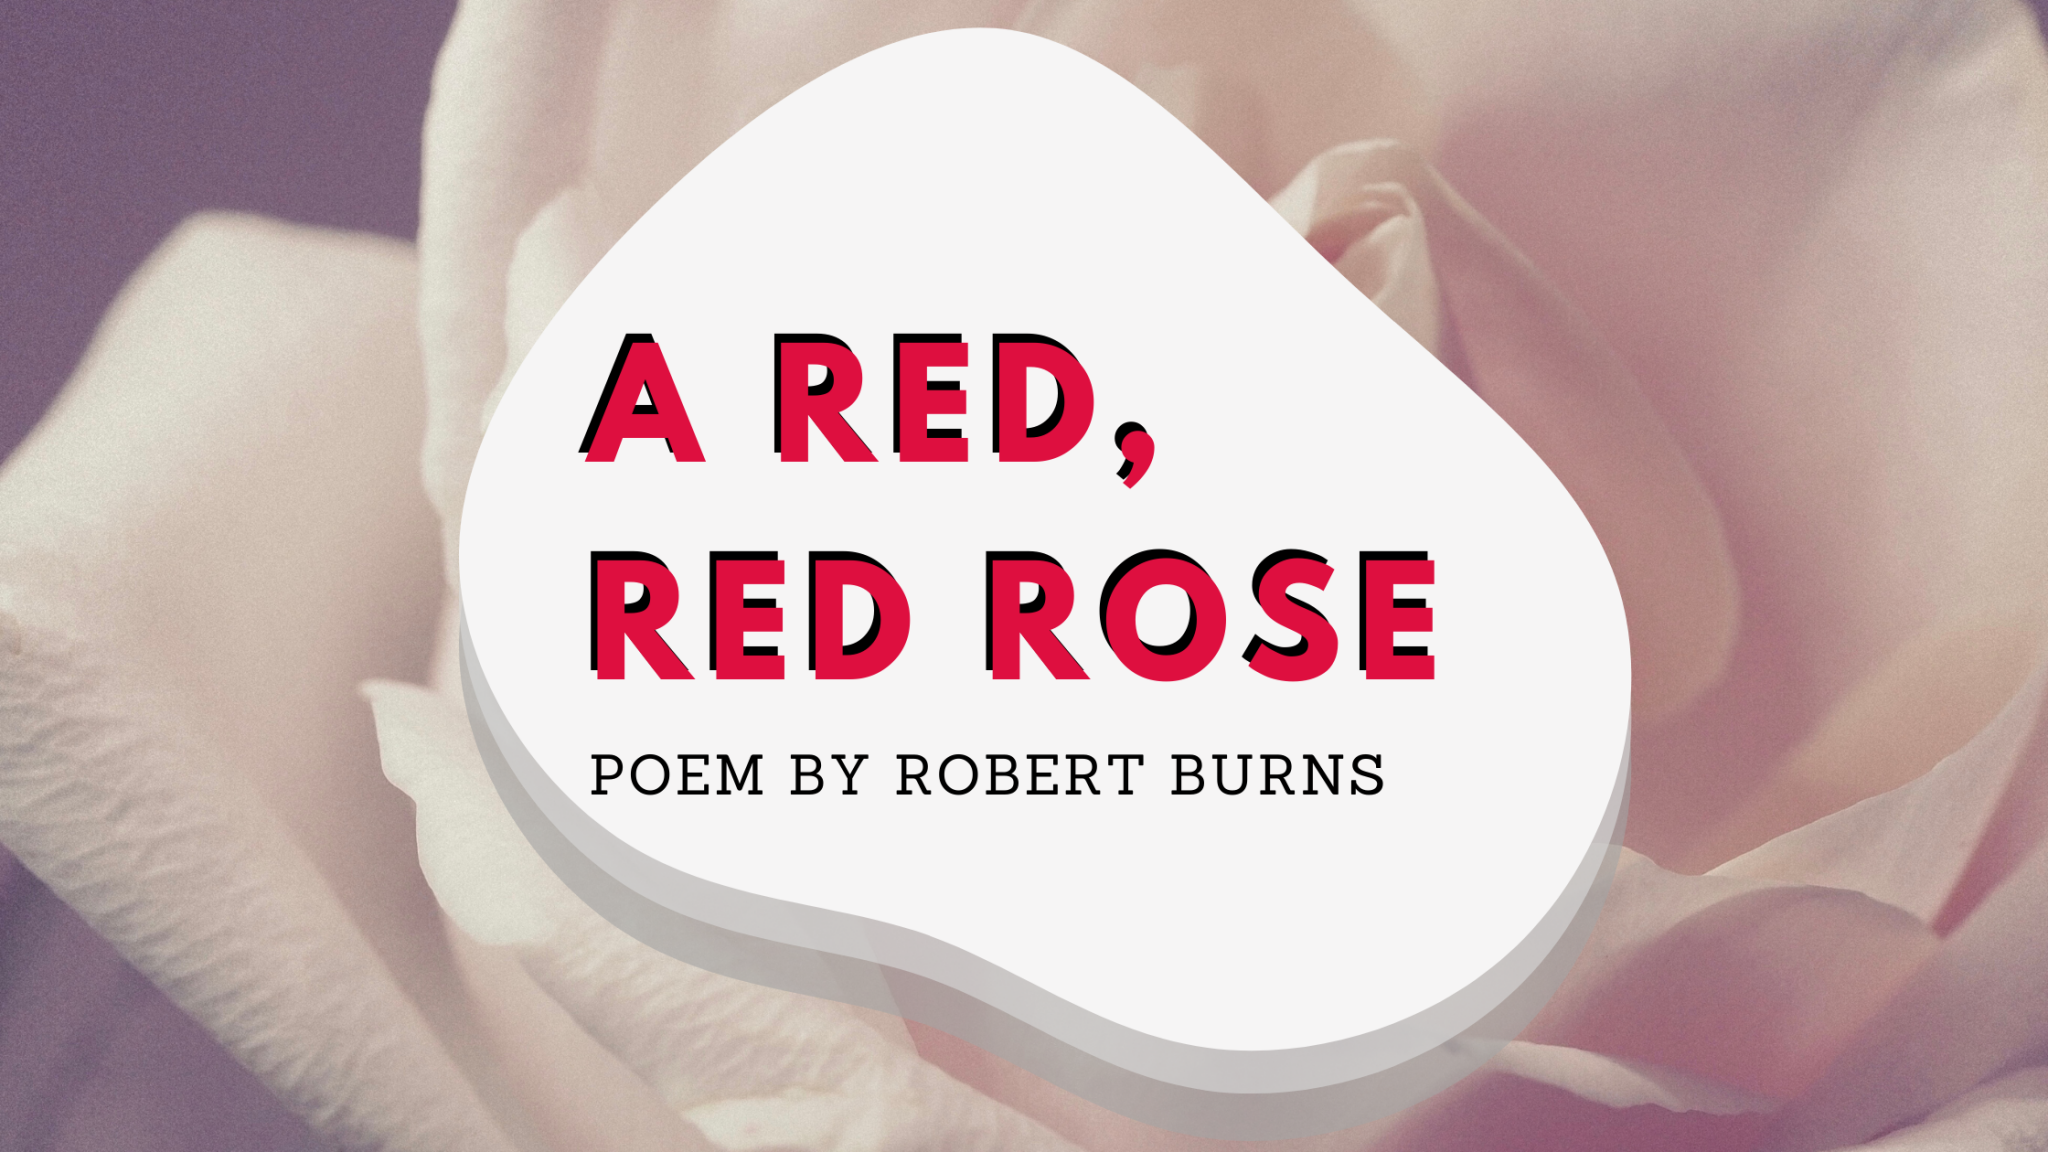 A Red, Red Rose by Robert Burns